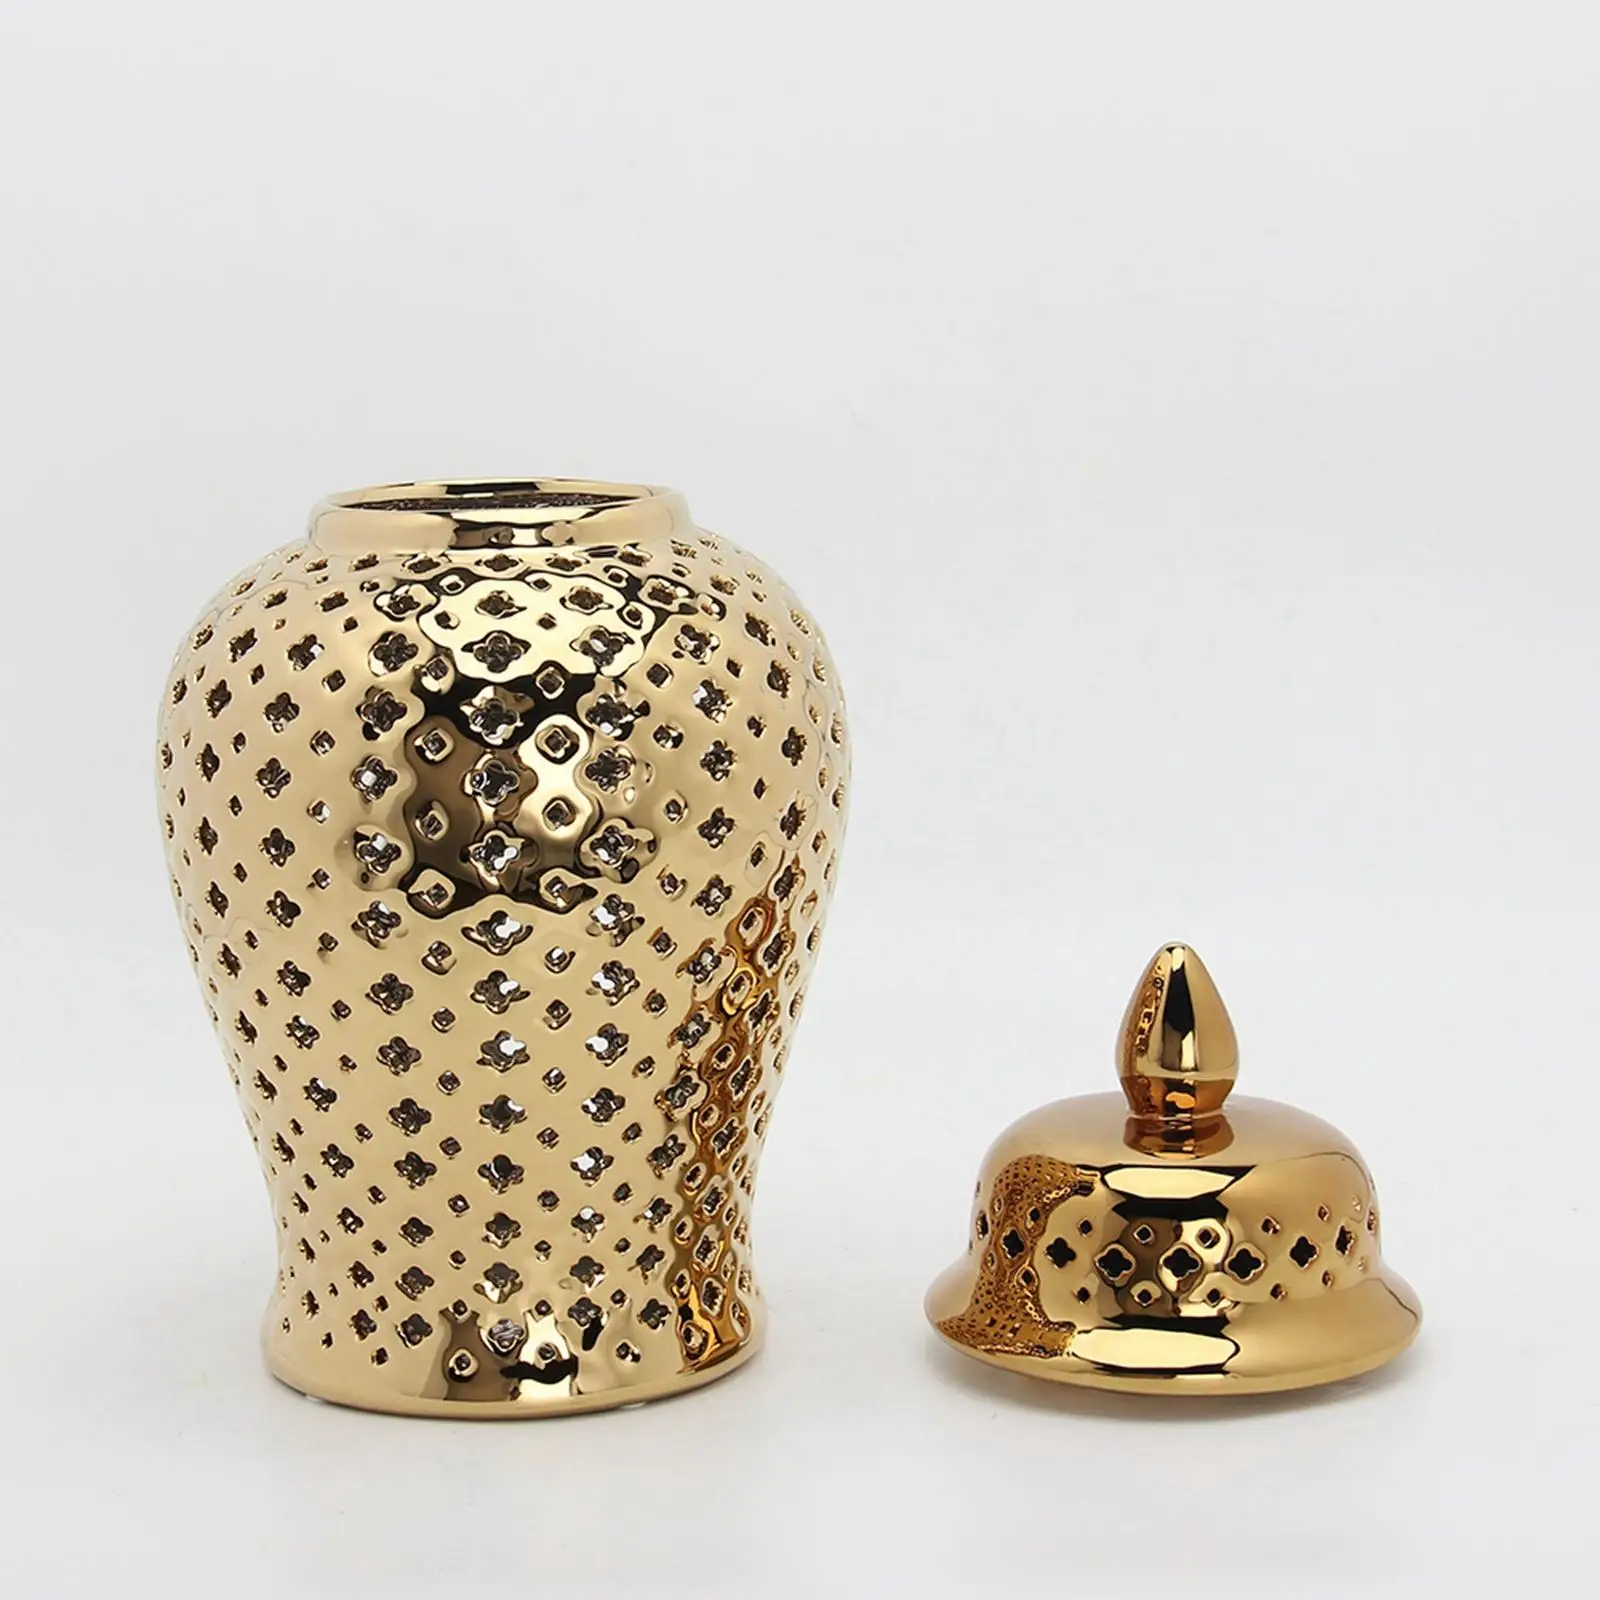 Ceramic Ginger Jar Oriental Handicraft Lattice Universal Pierced Gold Collectable for Parties Wedding Home Decoration Gift Cafe